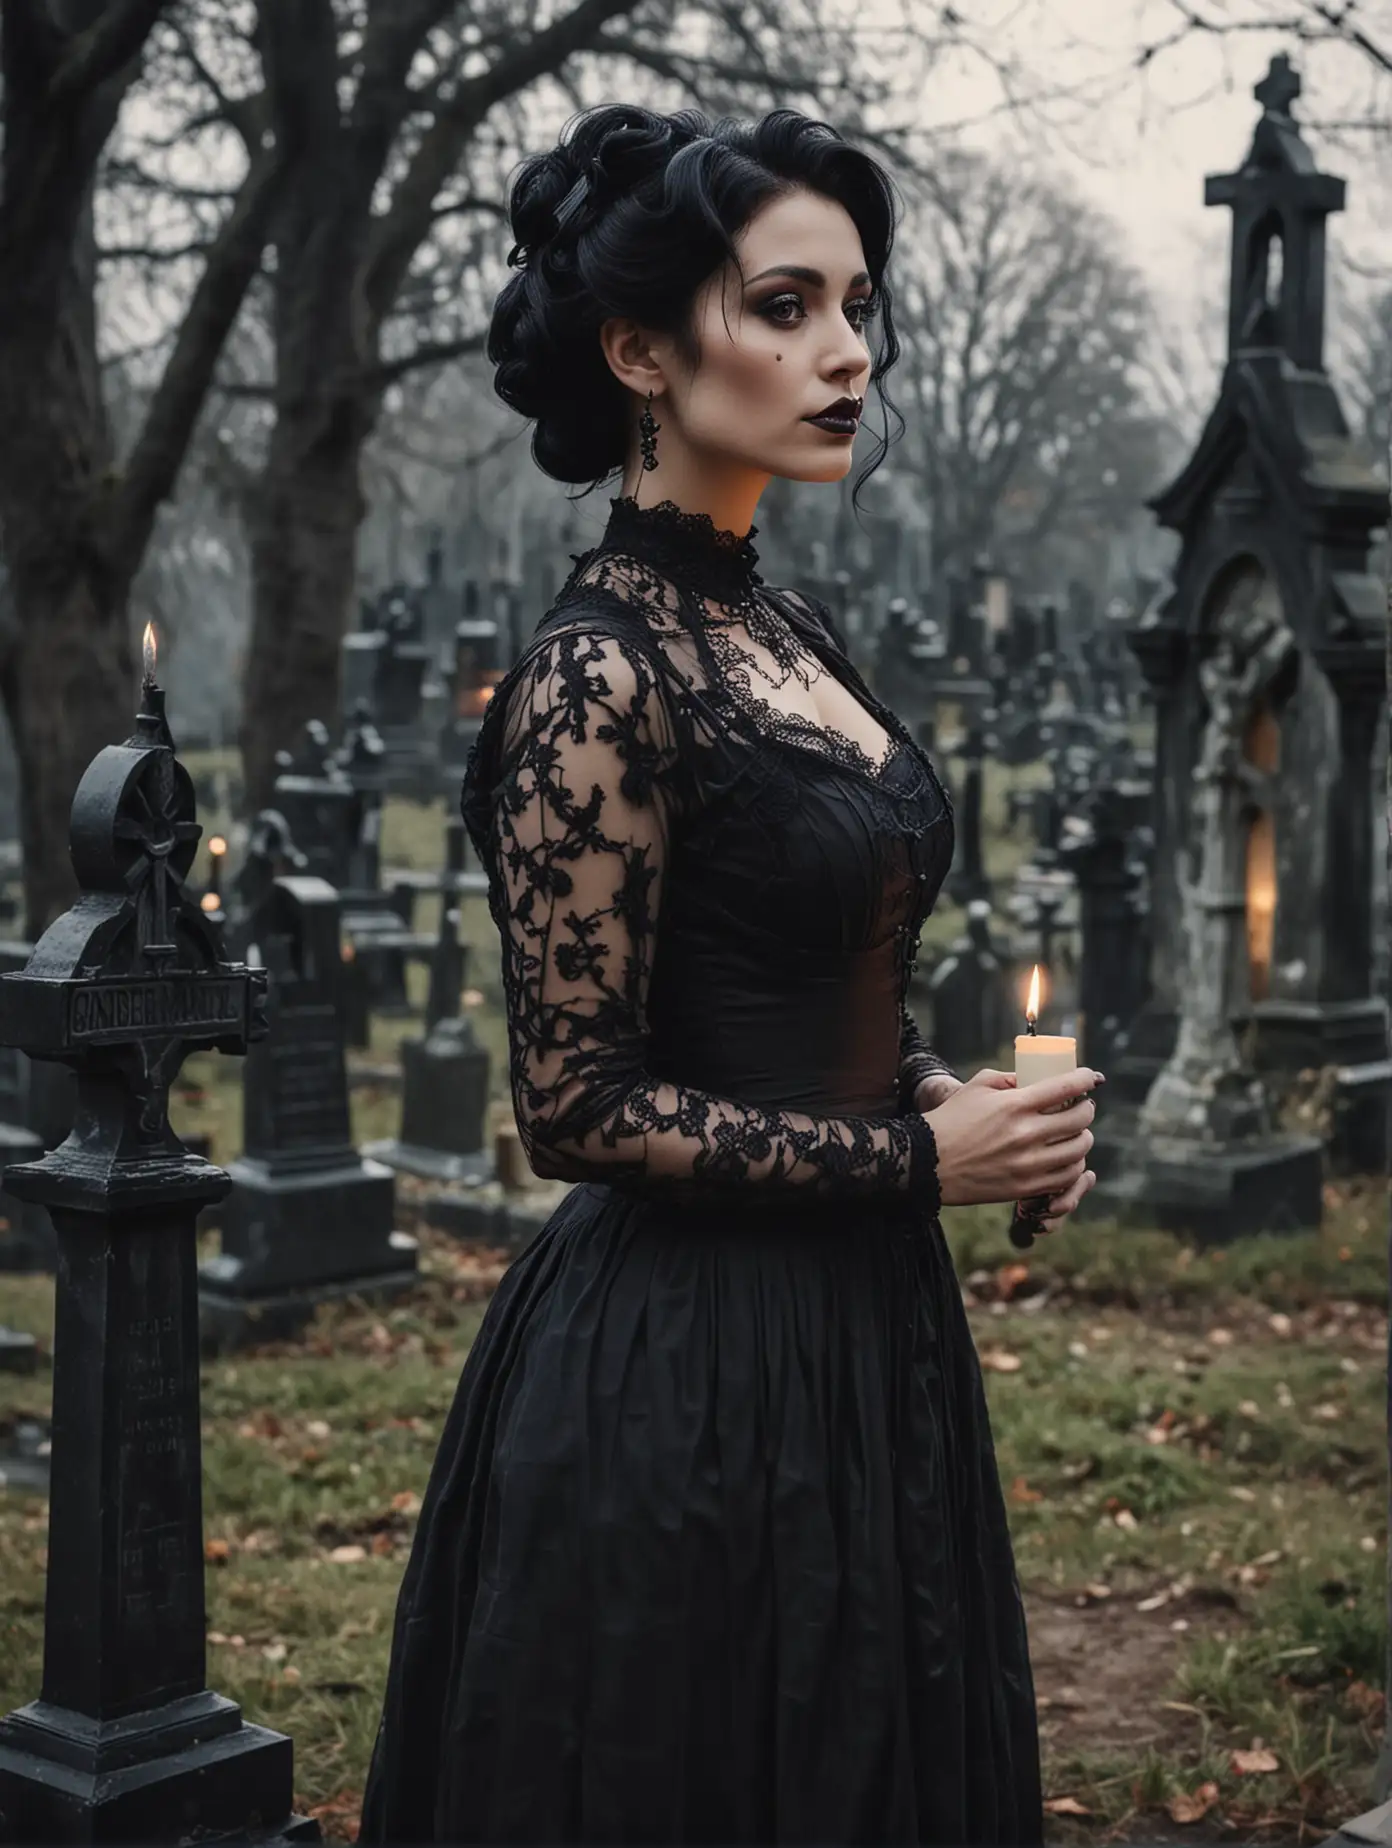 Edwardian Gothic Woman Holding Candle in Graveyard